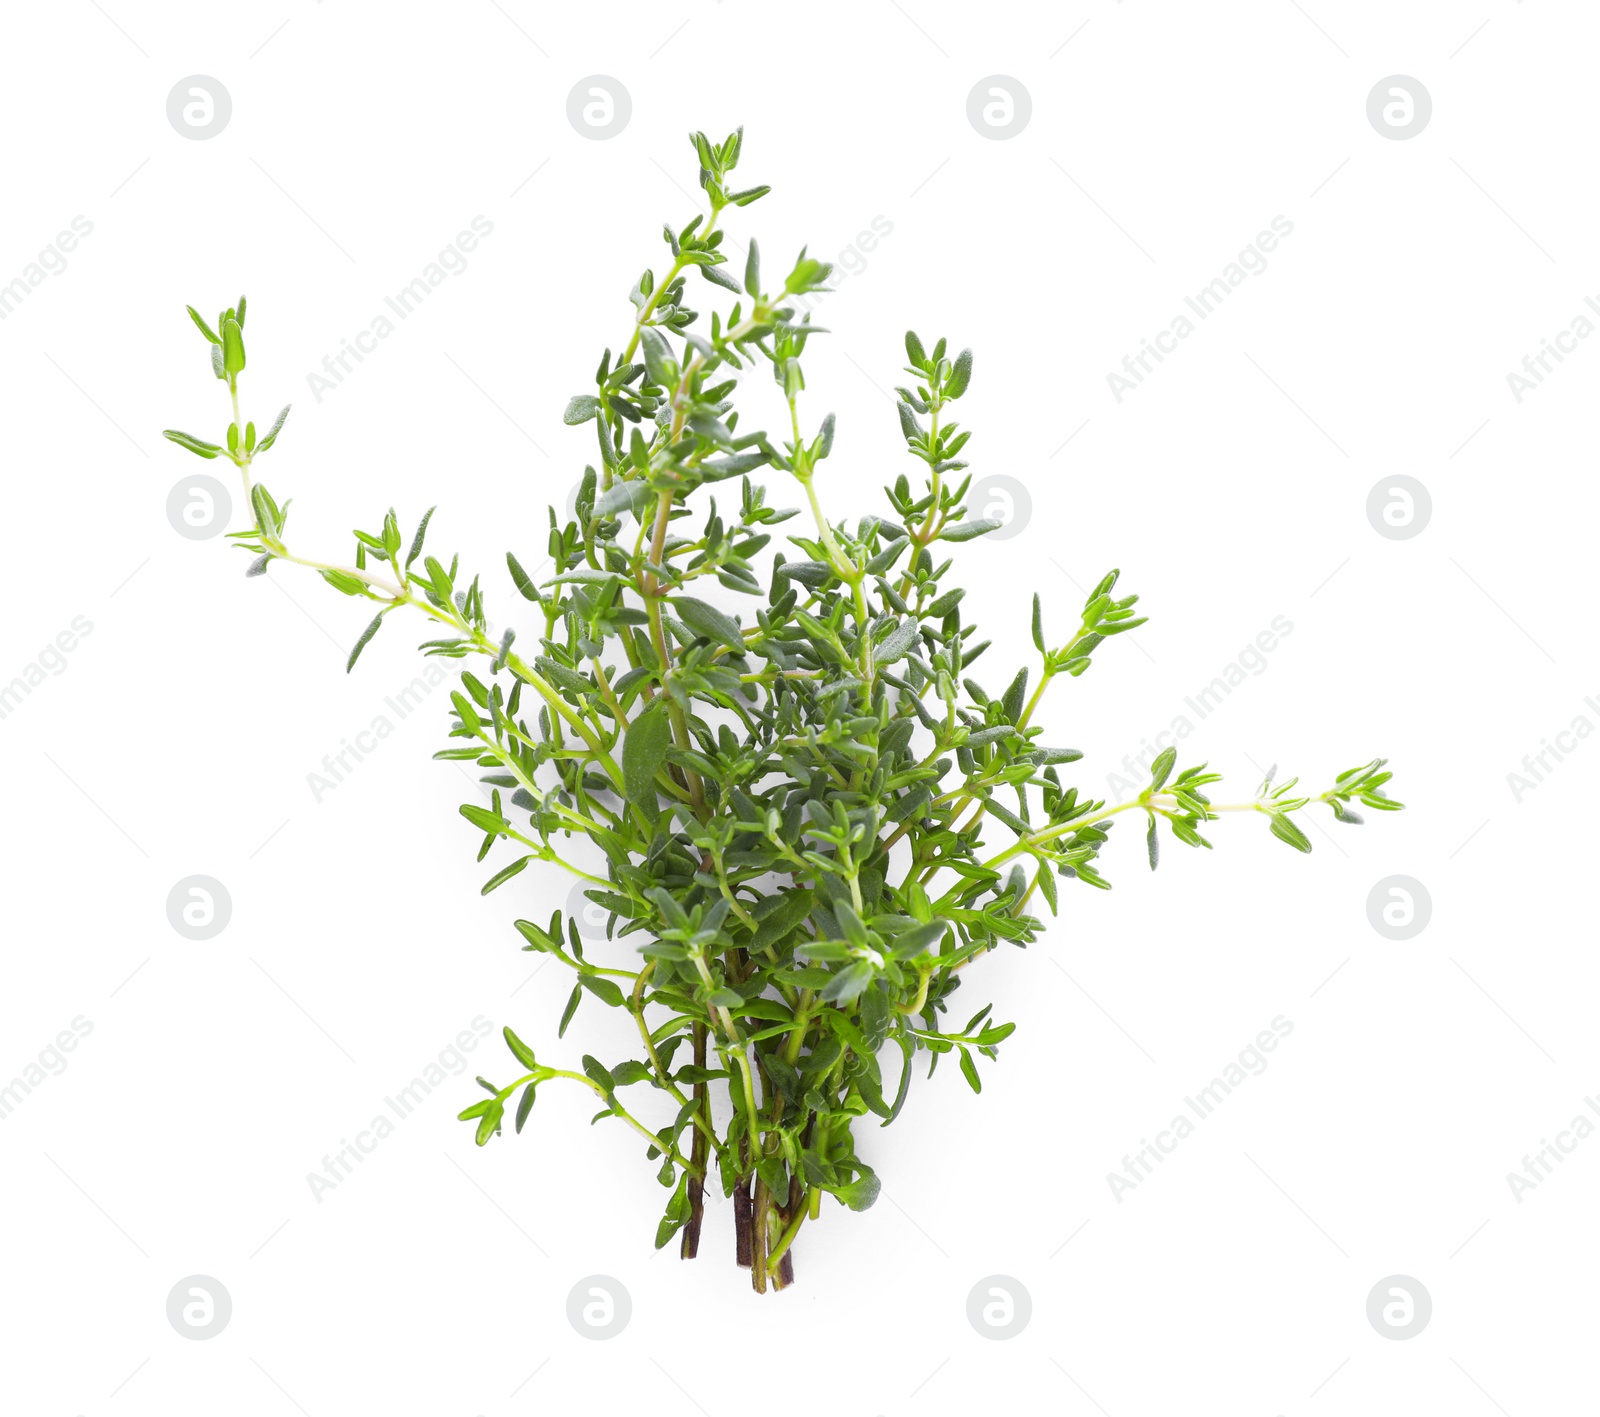 Photo of Bunch of fresh thyme isolated on white